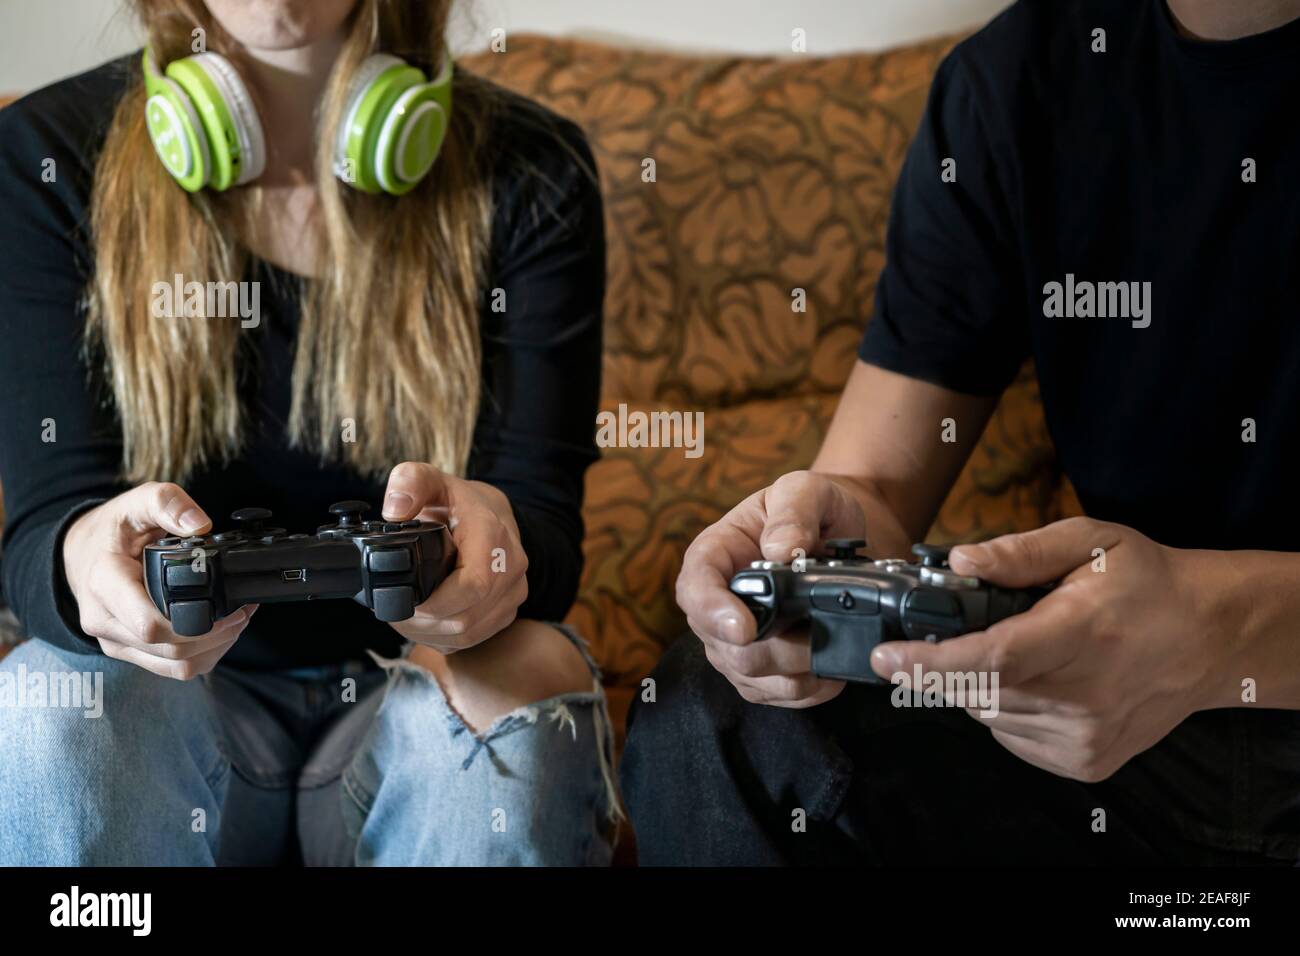 Free Photo  Boyfriend and girlfriend playing video games with controller  on console. modern couple holding joystick to play online game together,  using accessories to have fun. leisure activity